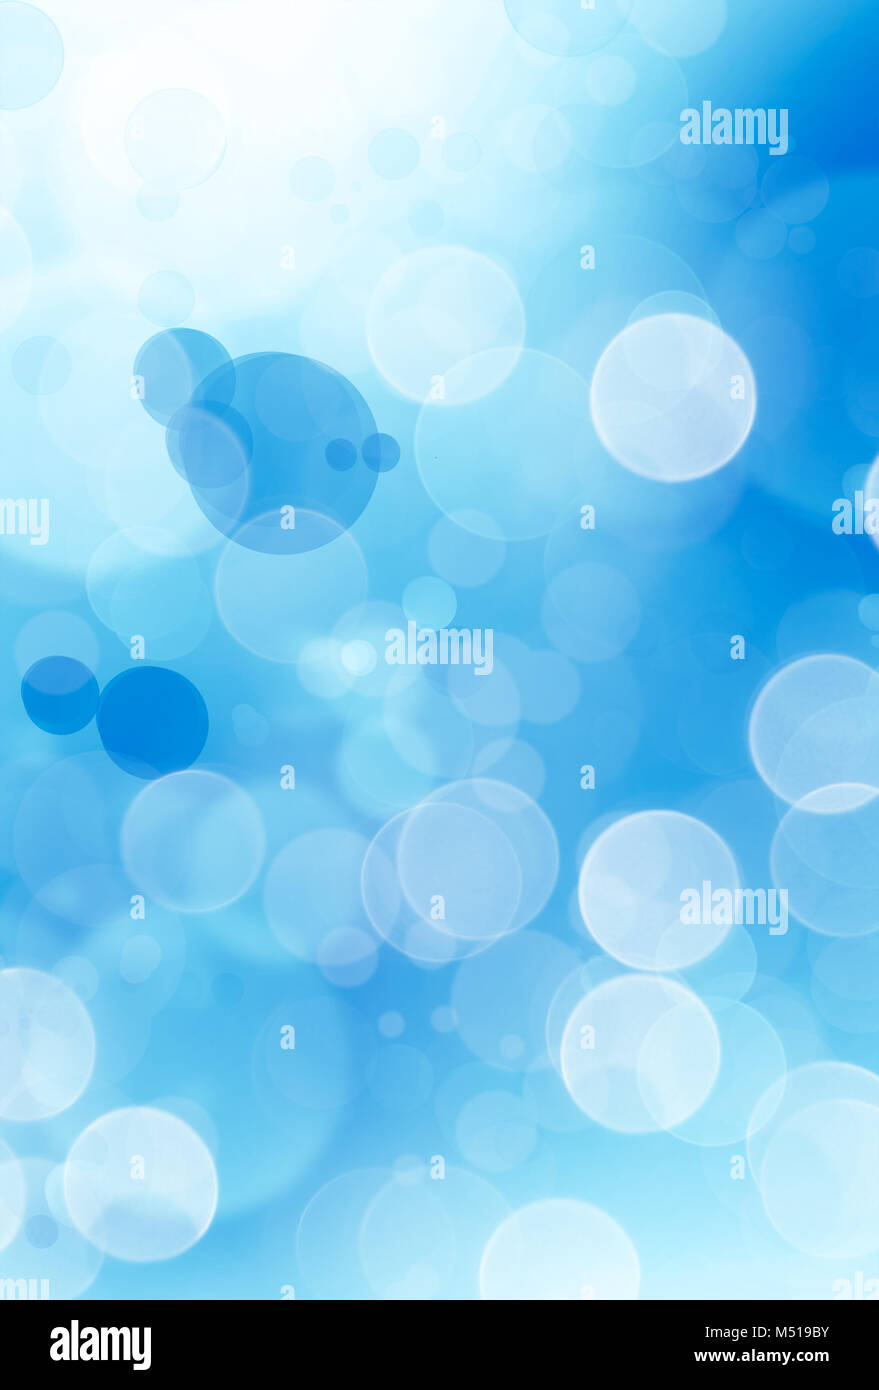 Abstract blue and white circles background Stock Photo